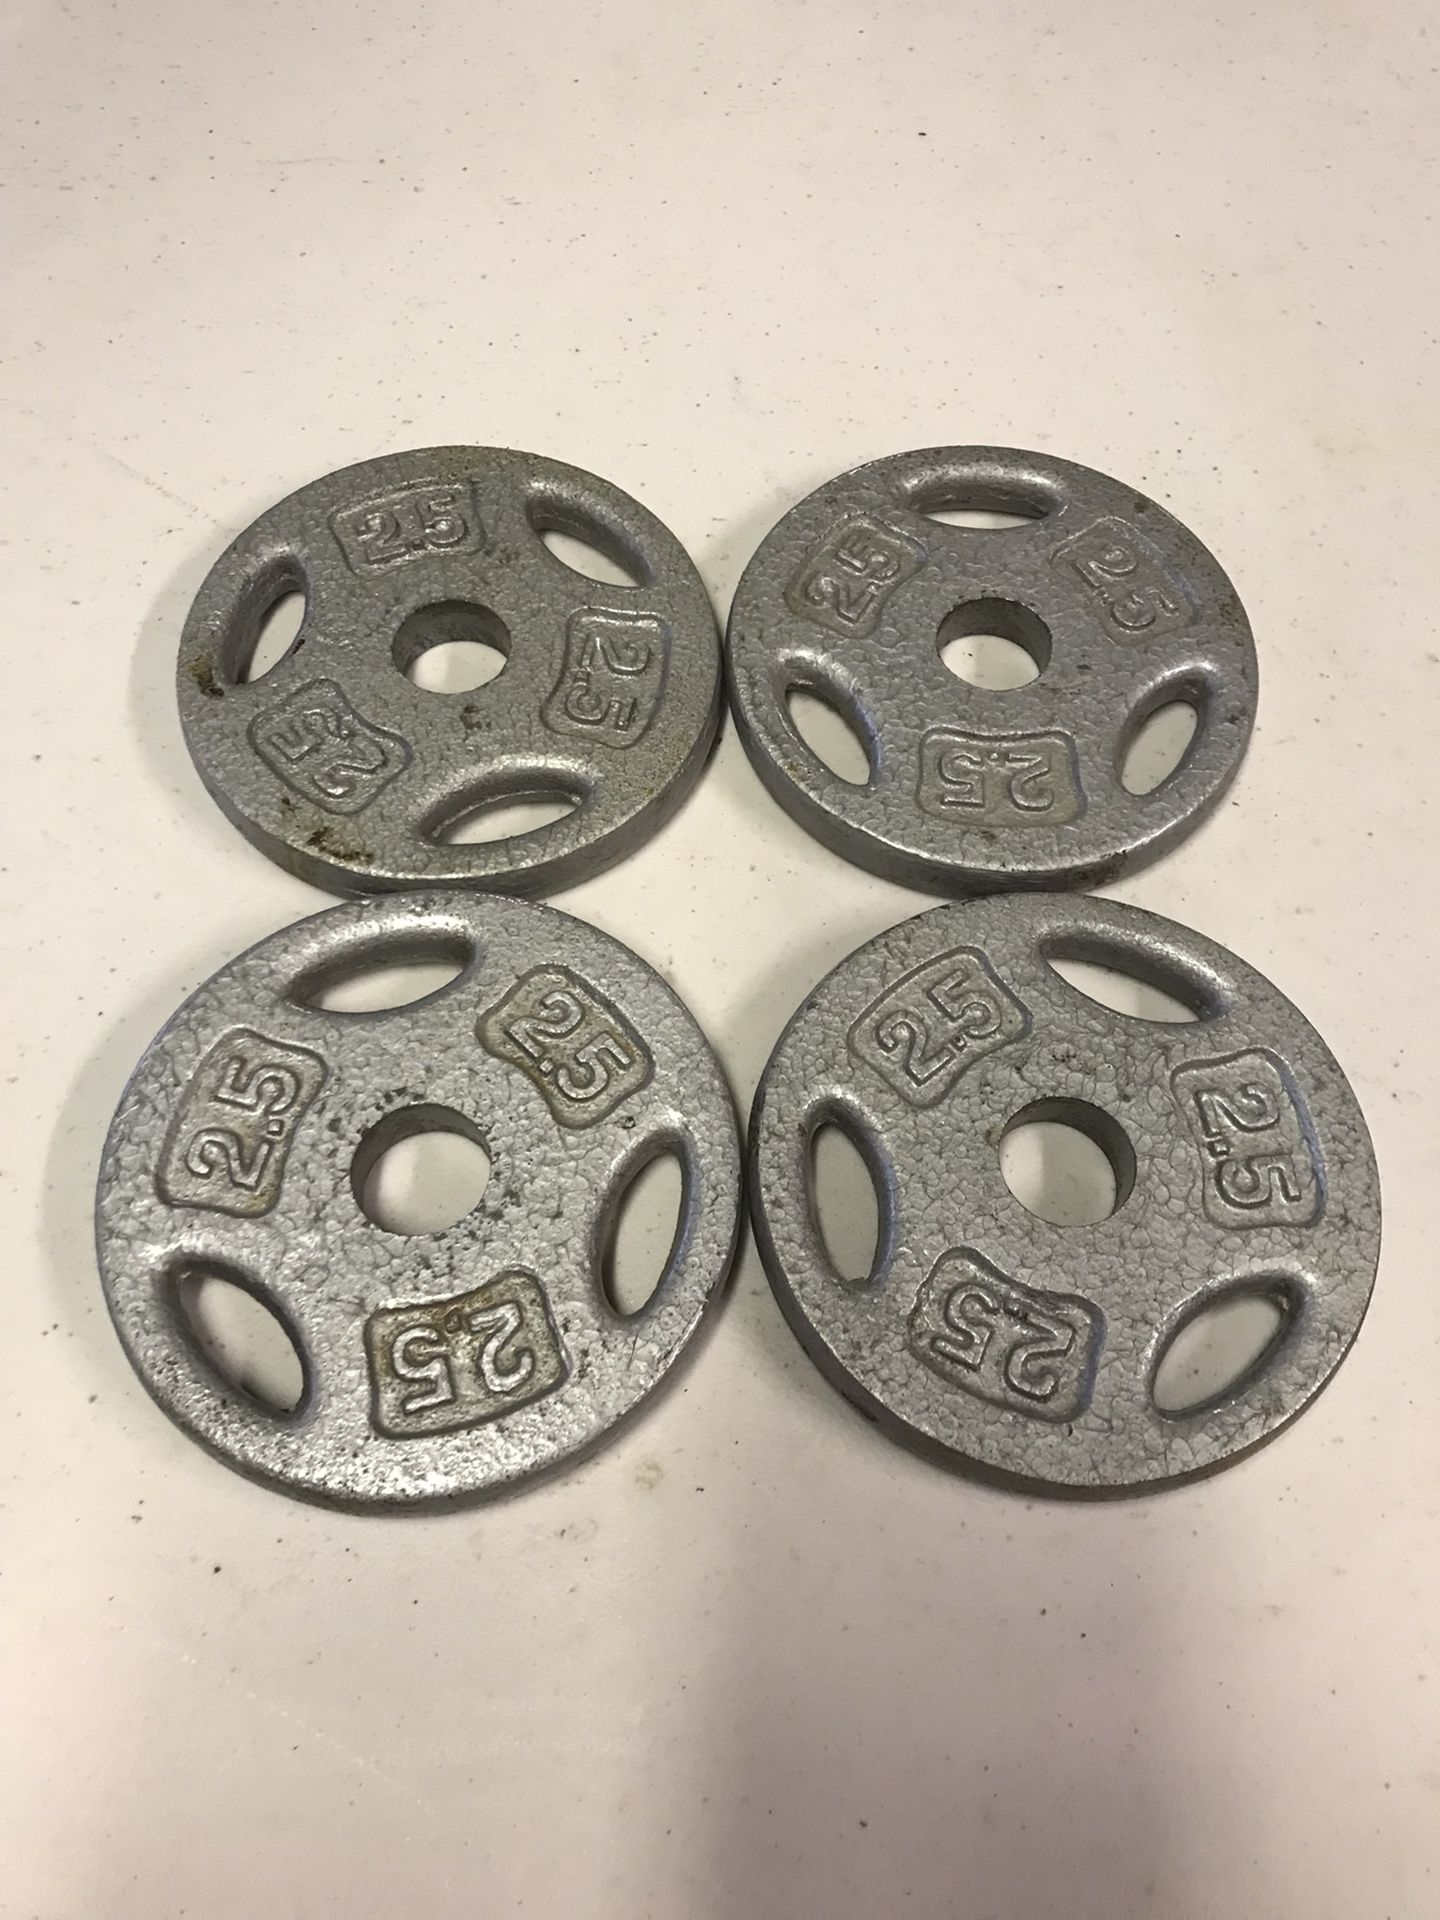 4 2 1/2 Lb Weight Plates, 1”